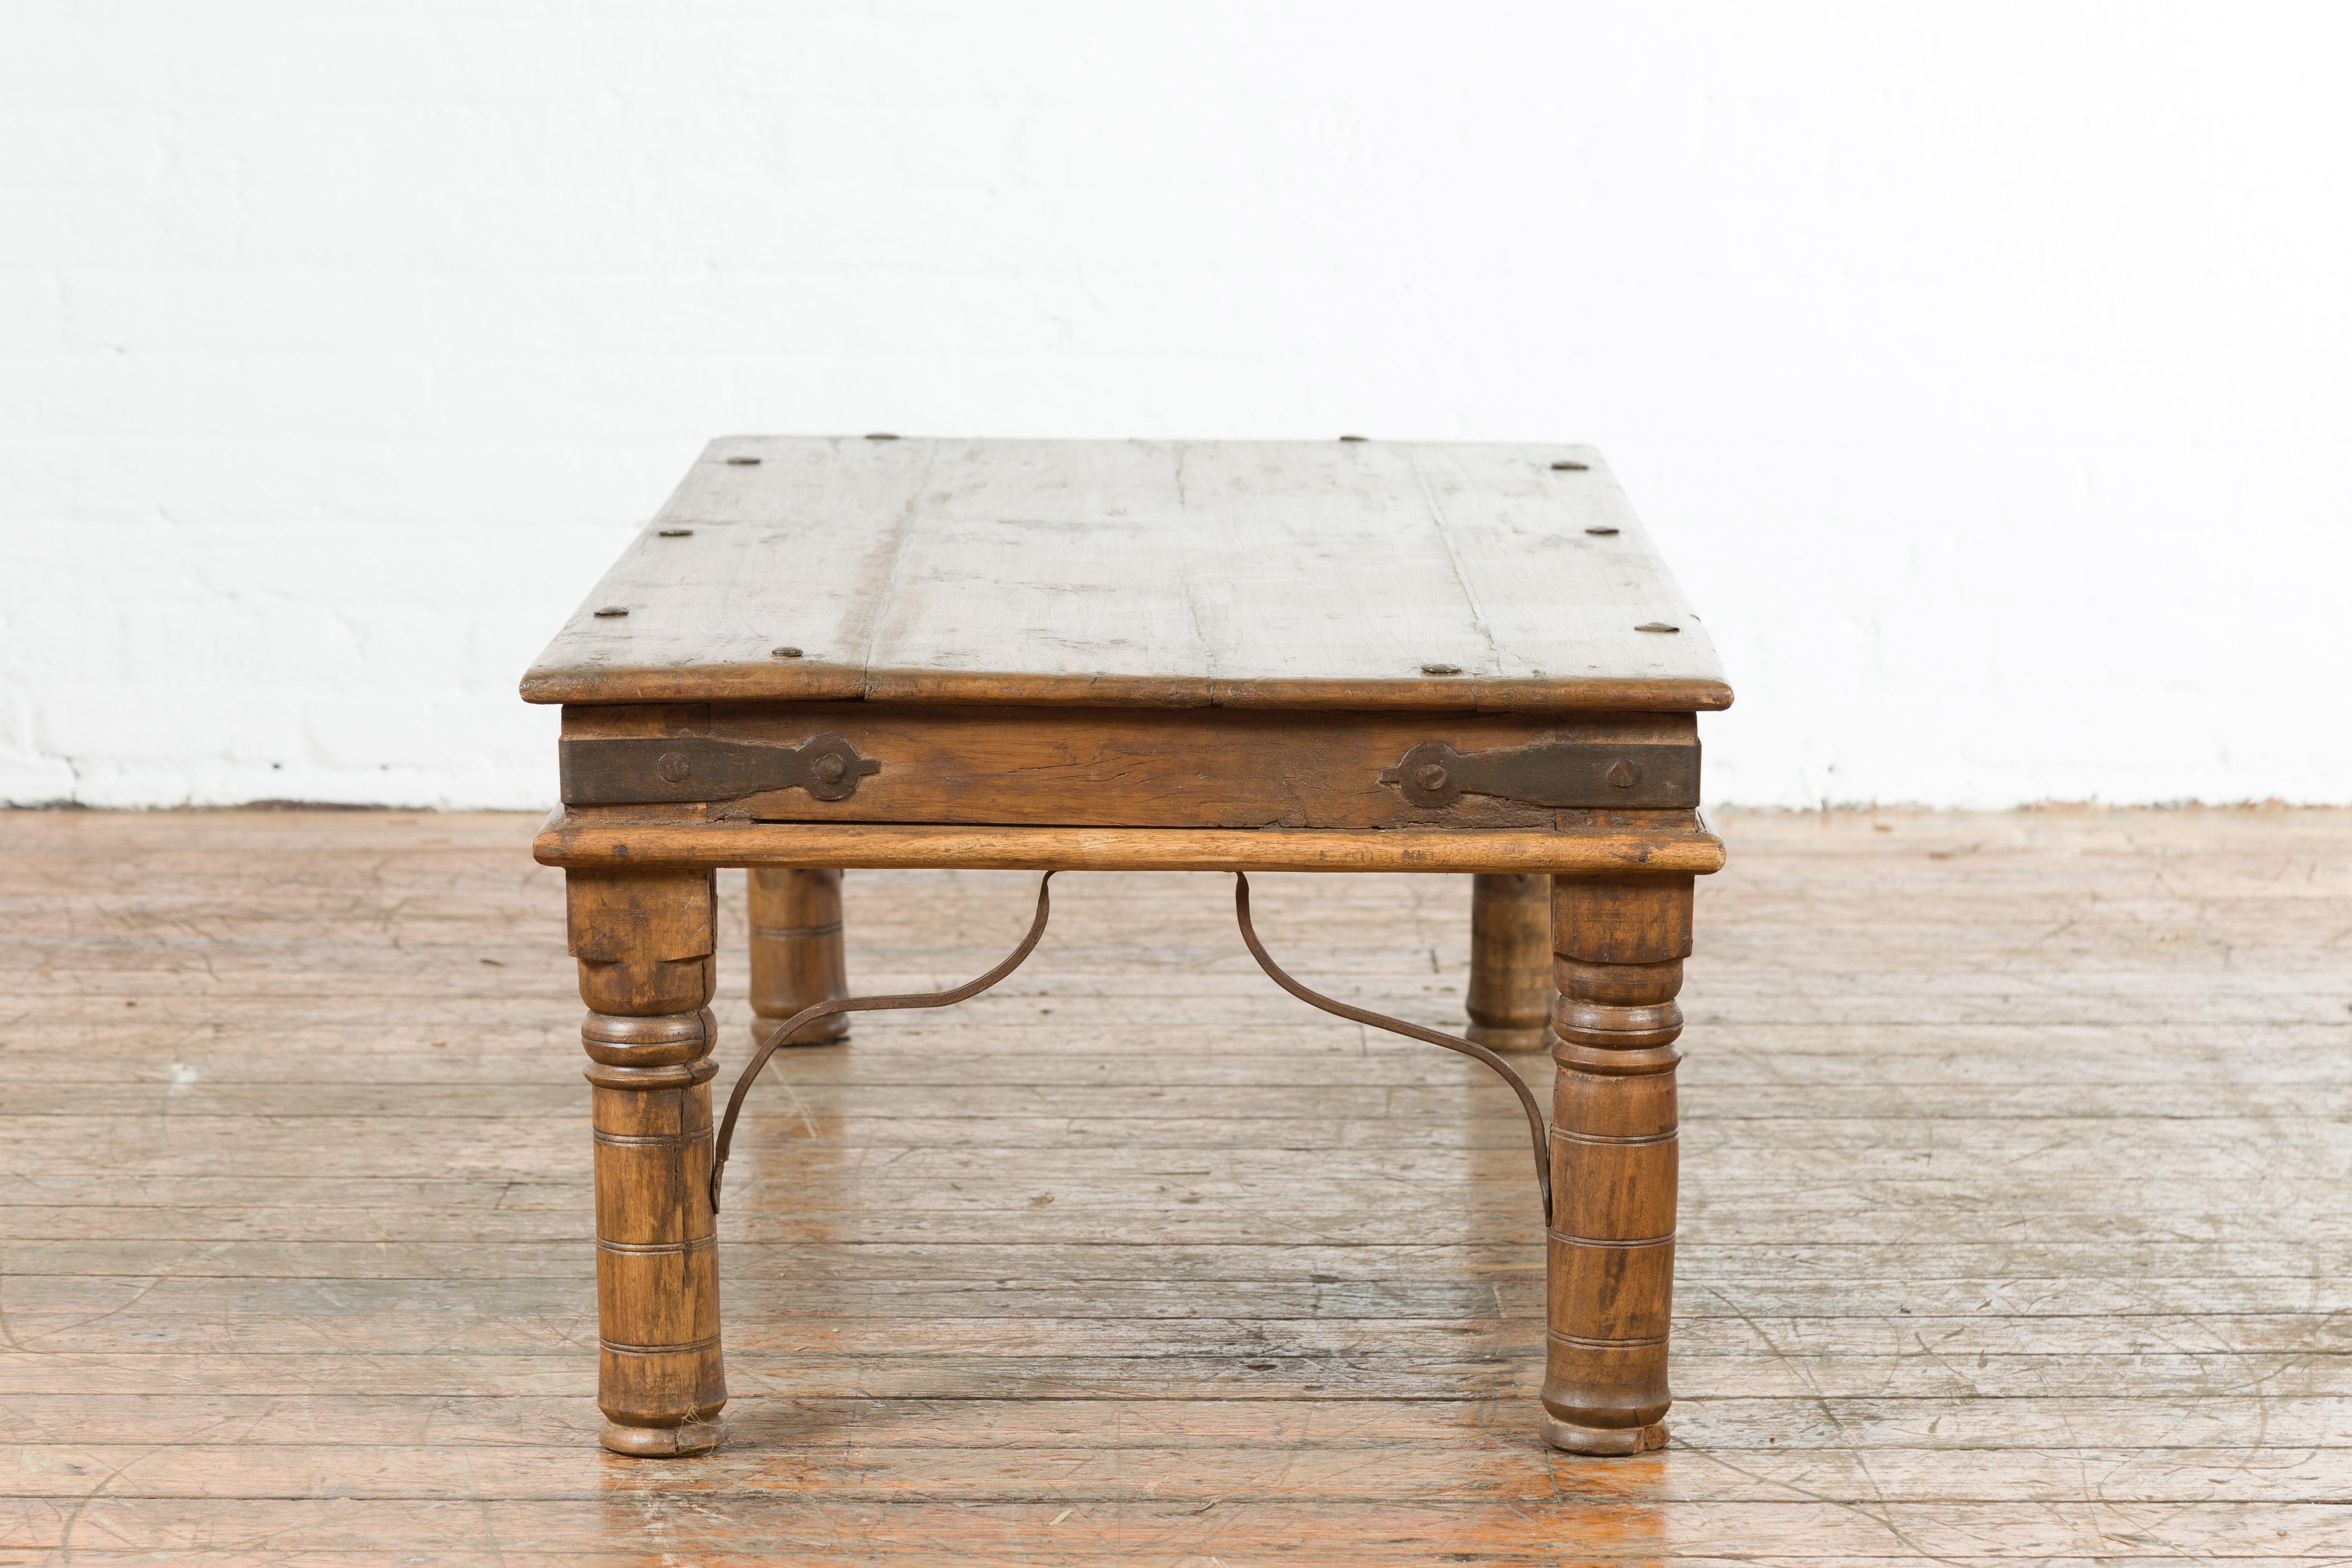 19th Century Rustic Indian Coffee Table with Painted Apron and Iron Accents 8